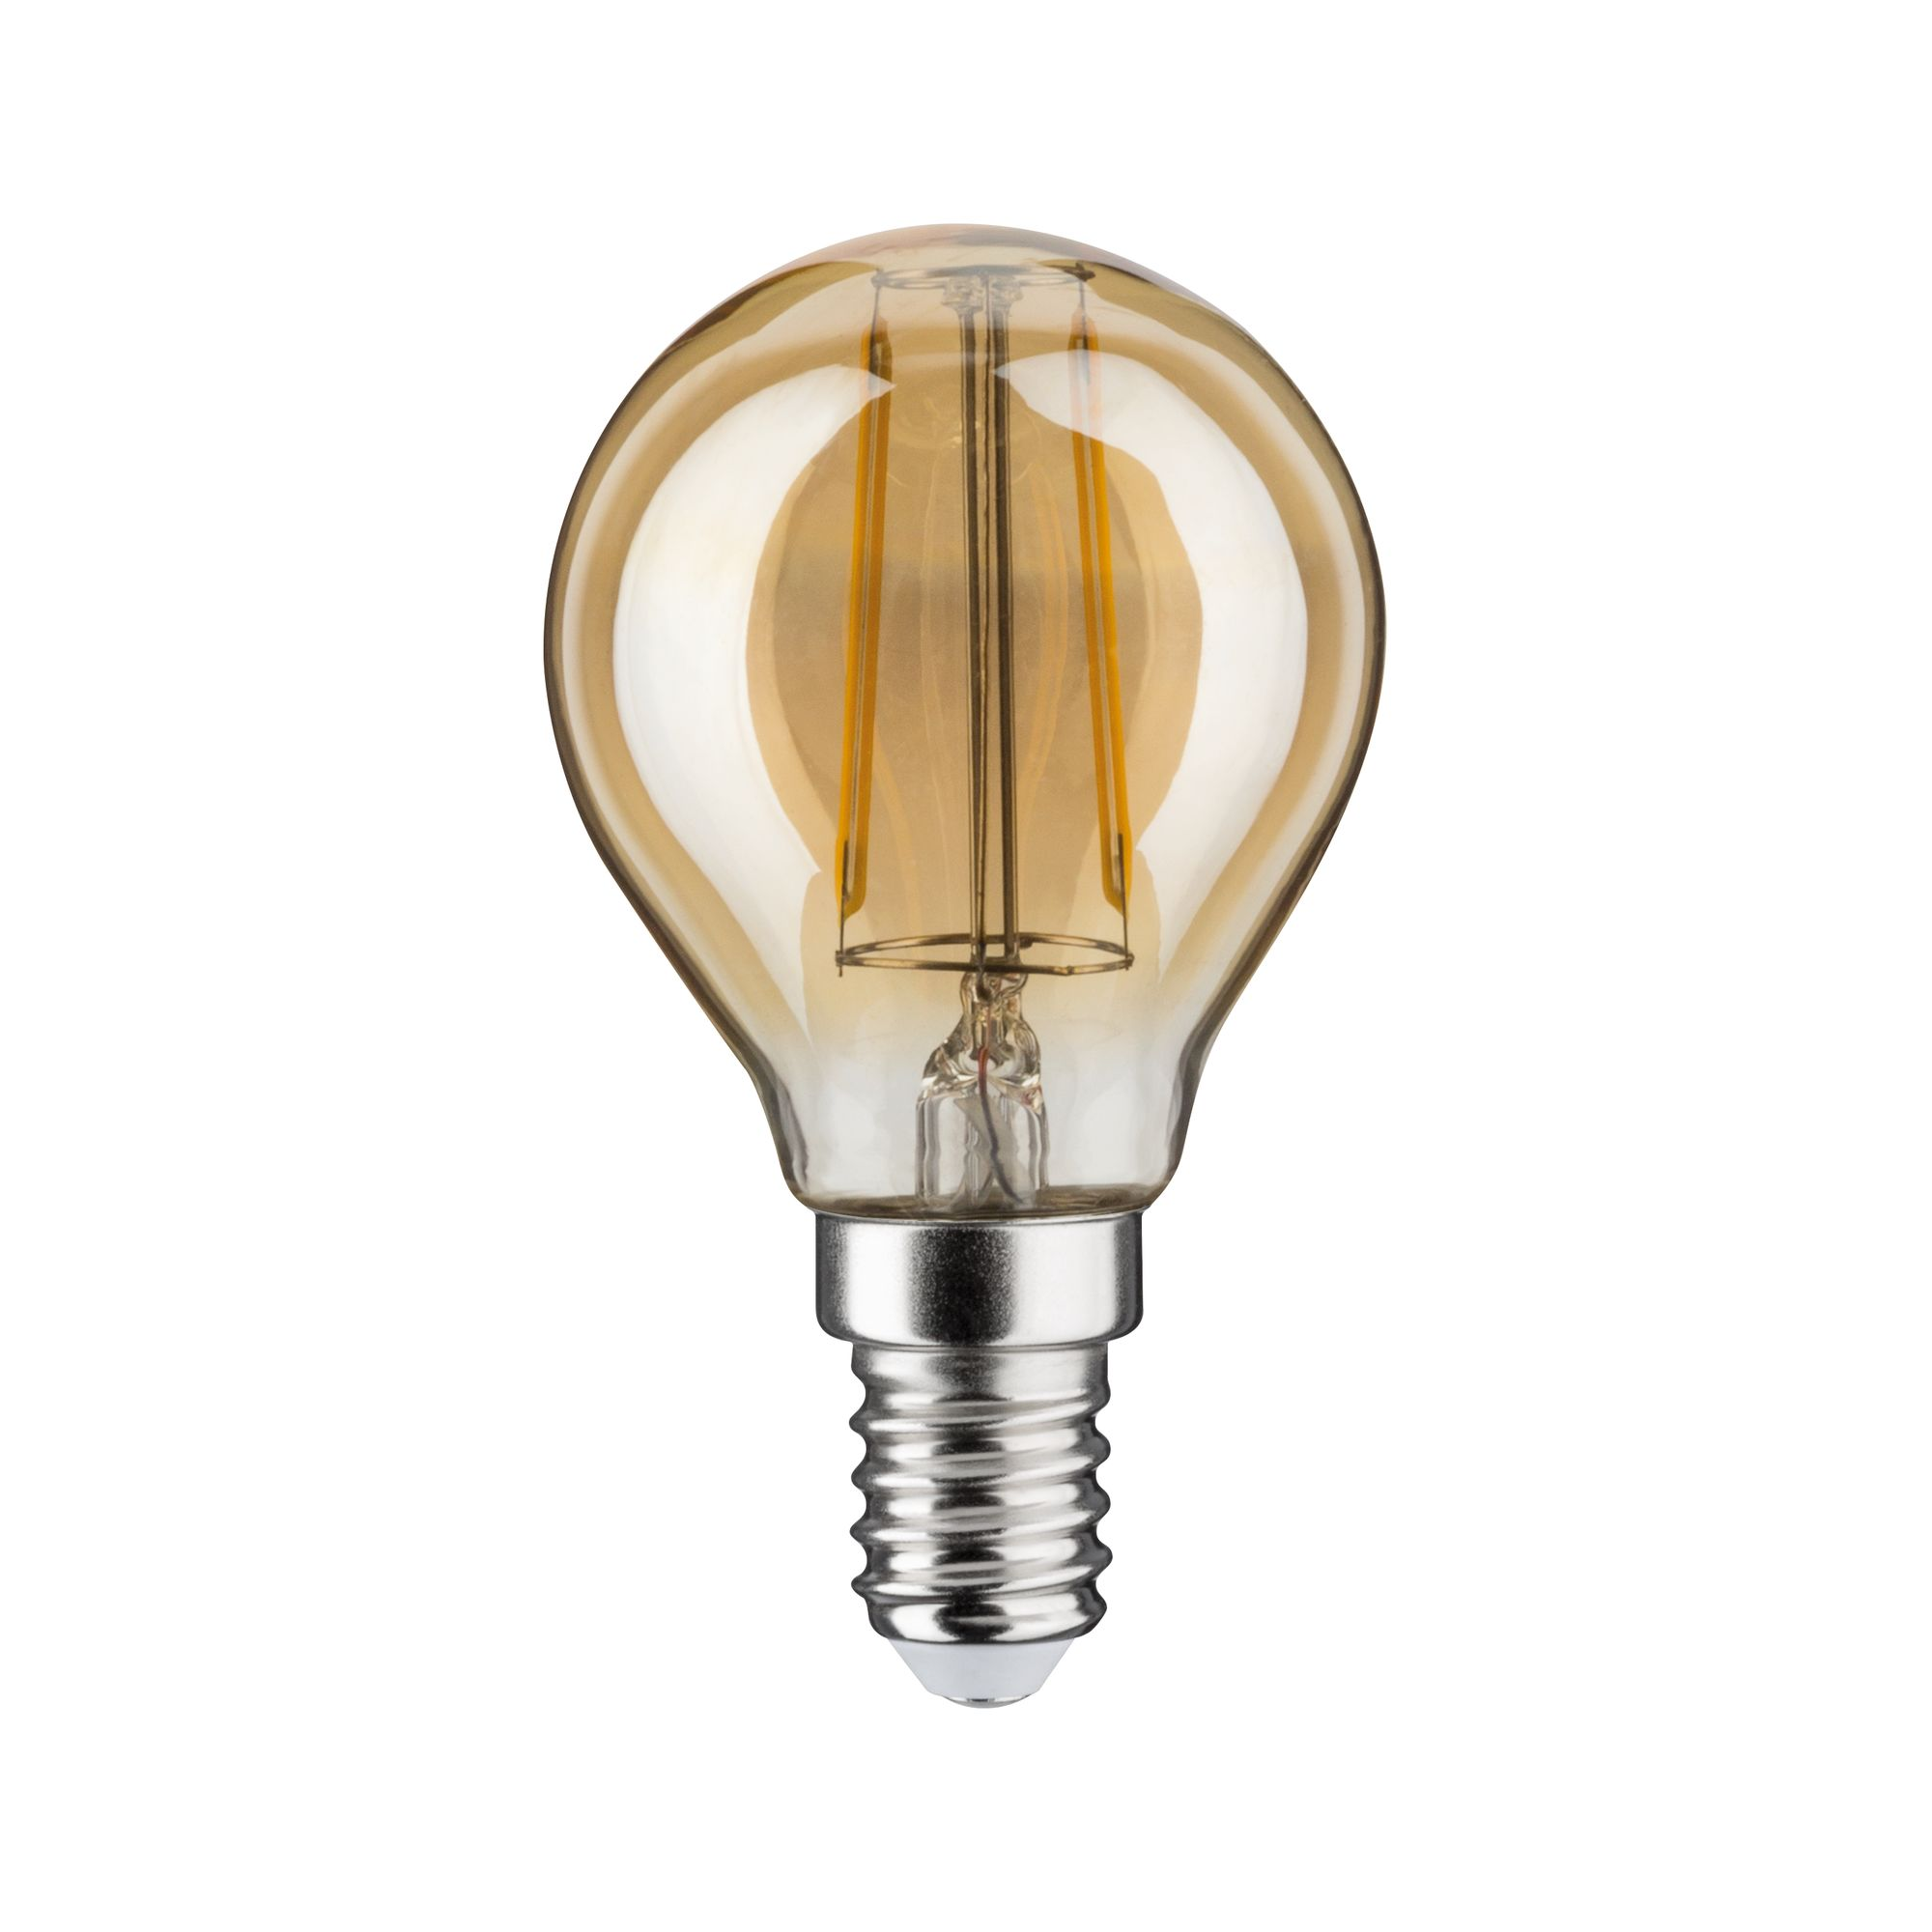 LED-Tropfenlampe E14 4,7W (37W) 430 lm warmgold + product picture